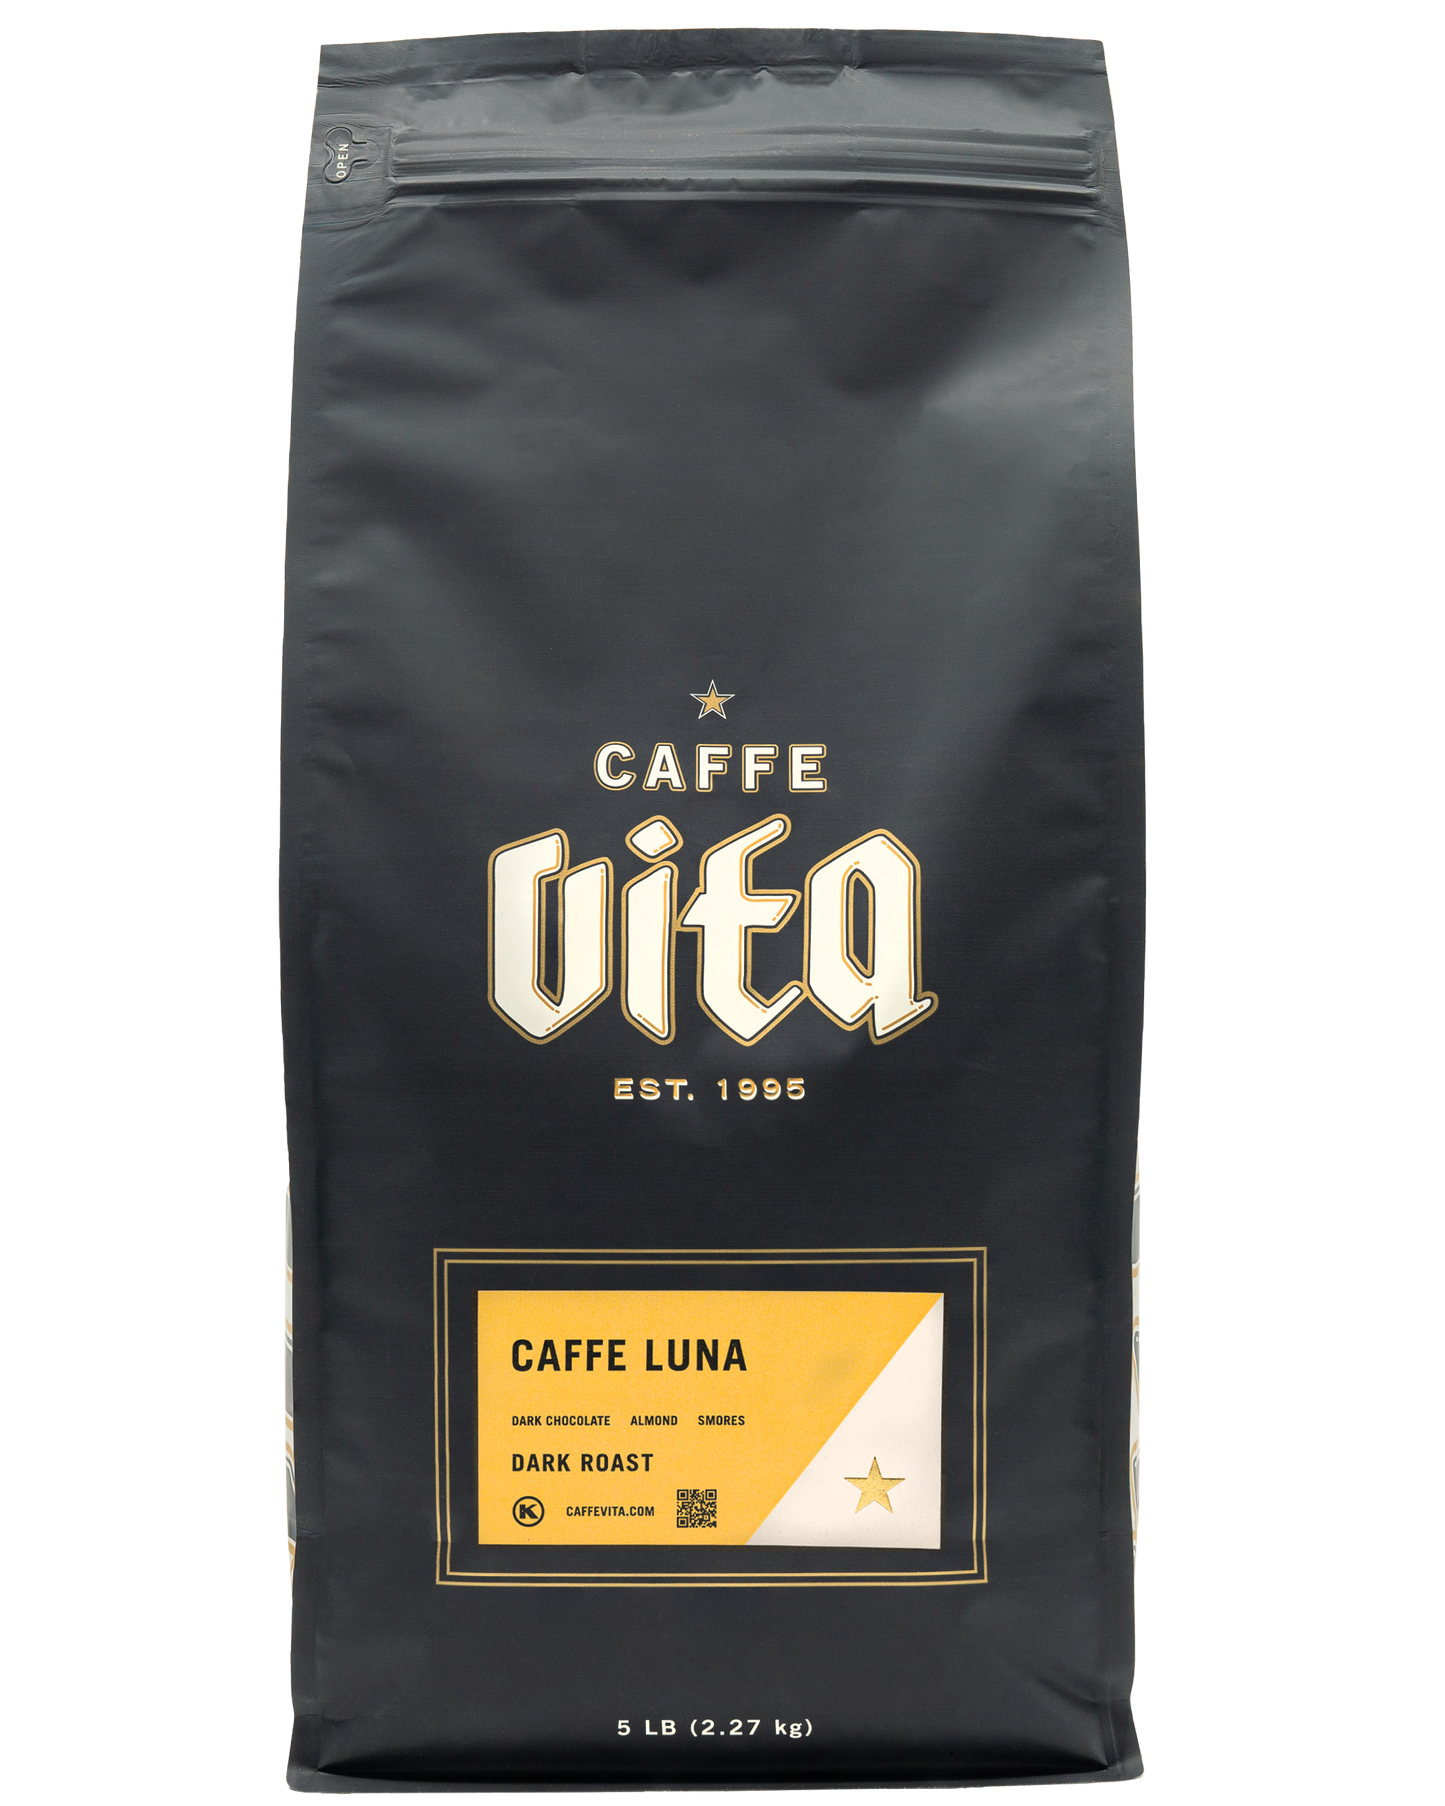 Front, 5lb Caffe Luna bag with yellow label.